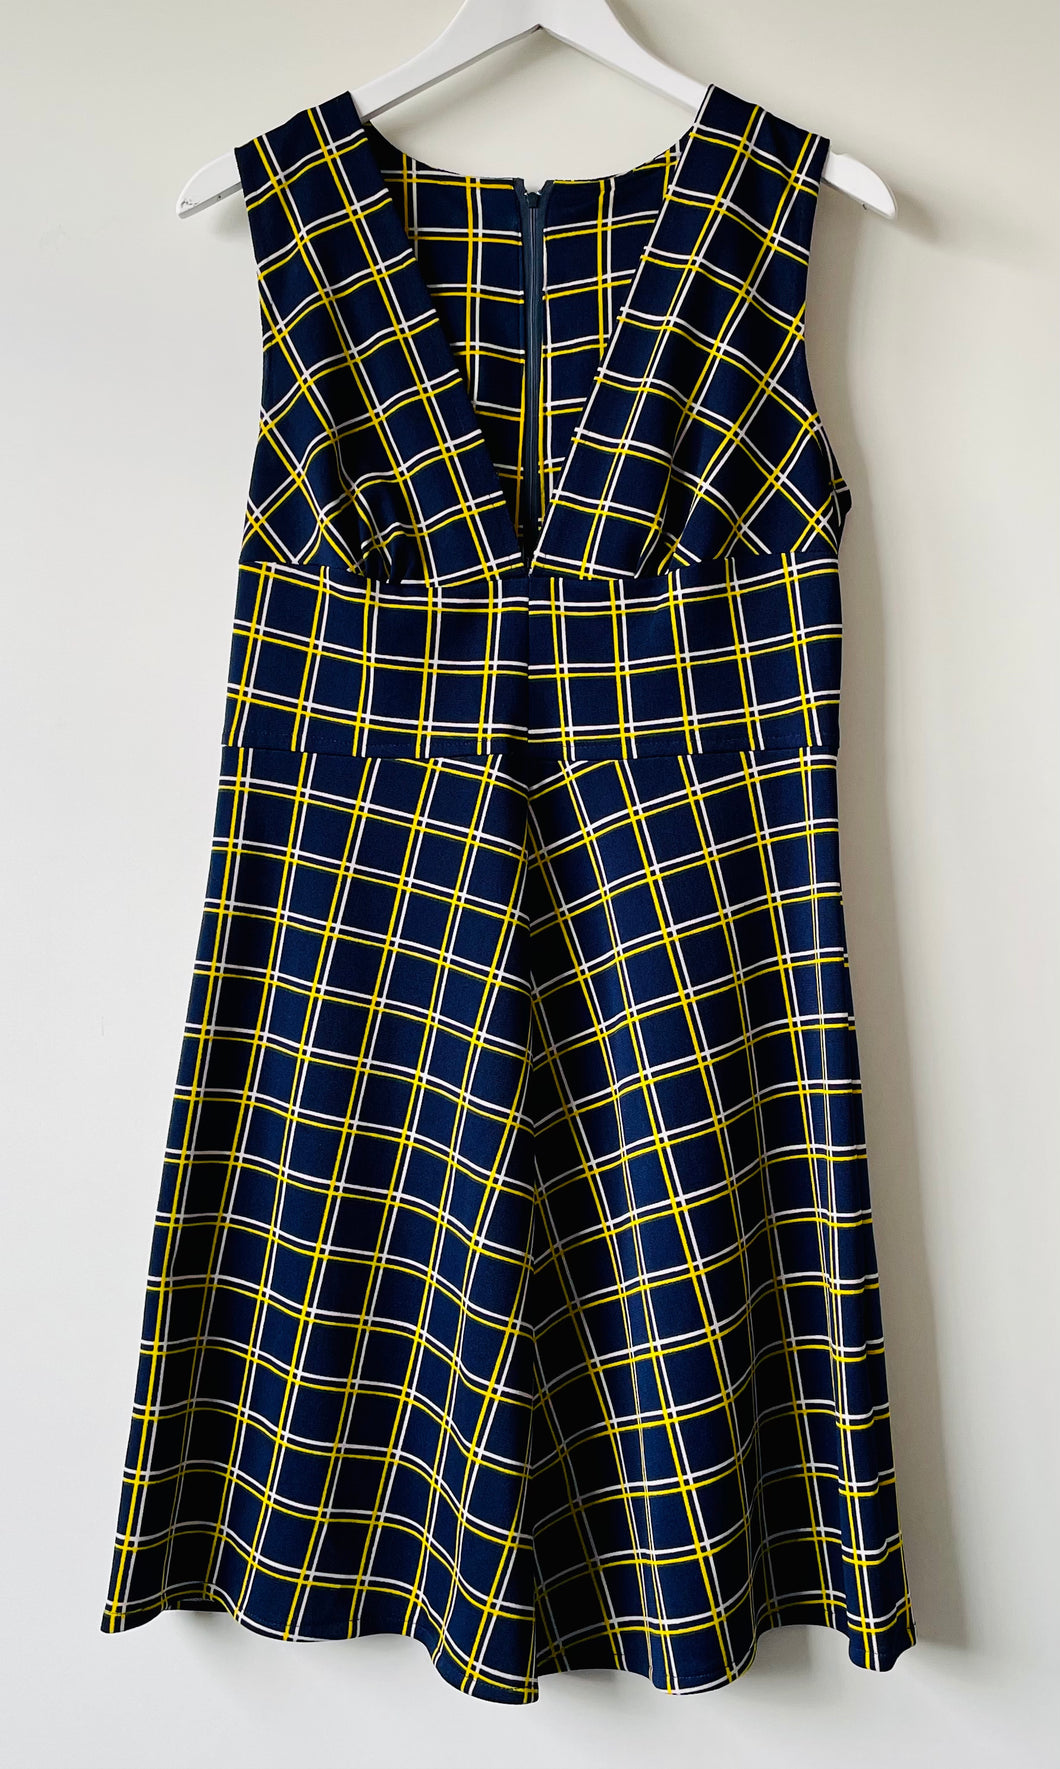 Sleeveless short 1970s blue and yellow check dress L